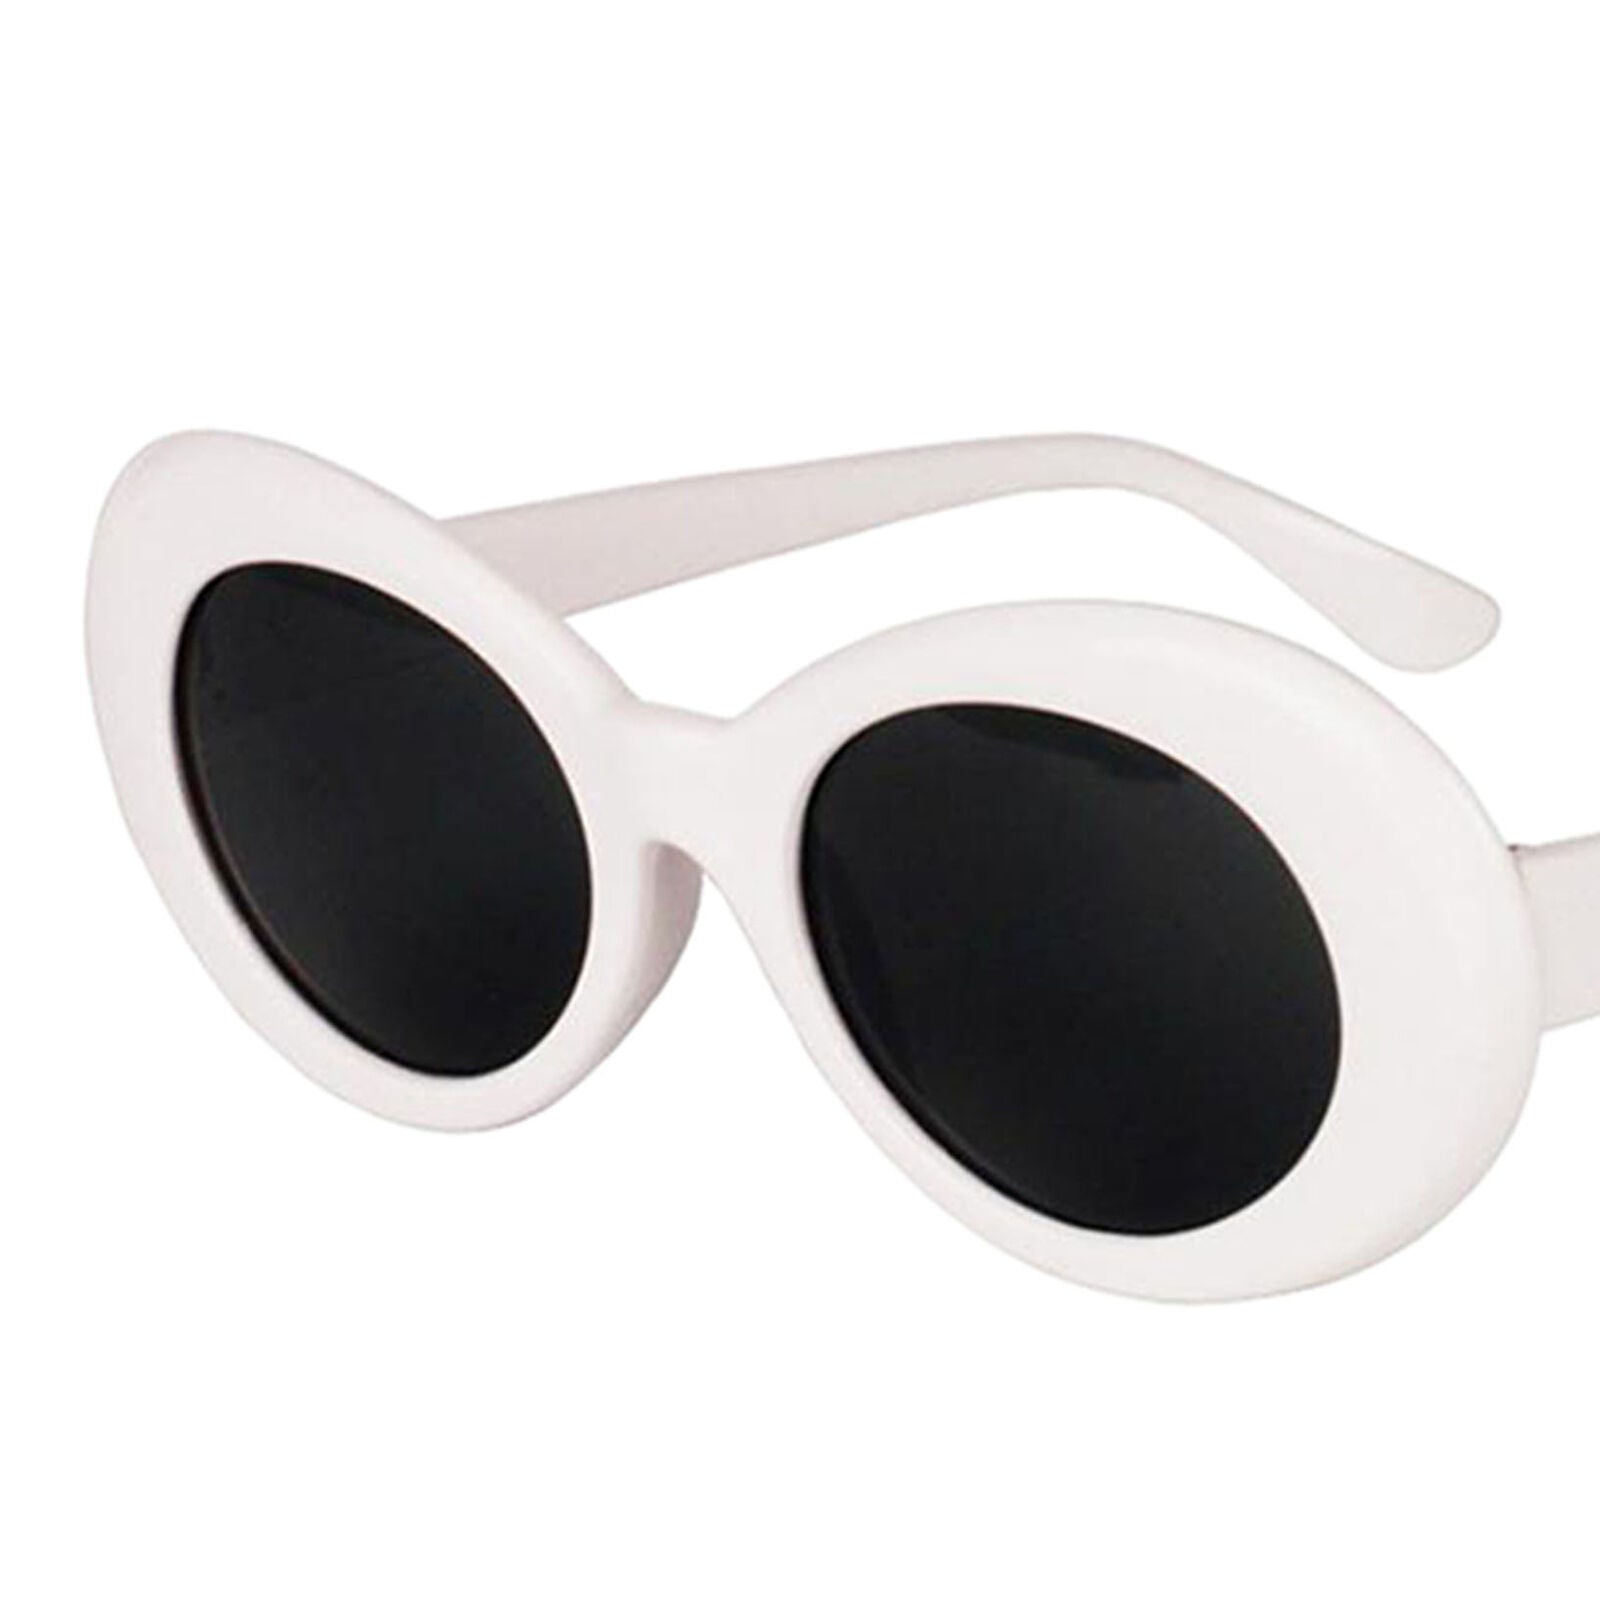 Clout Goggles Sunglasses Rapper Oval Shades Grunge Unisex Glasses